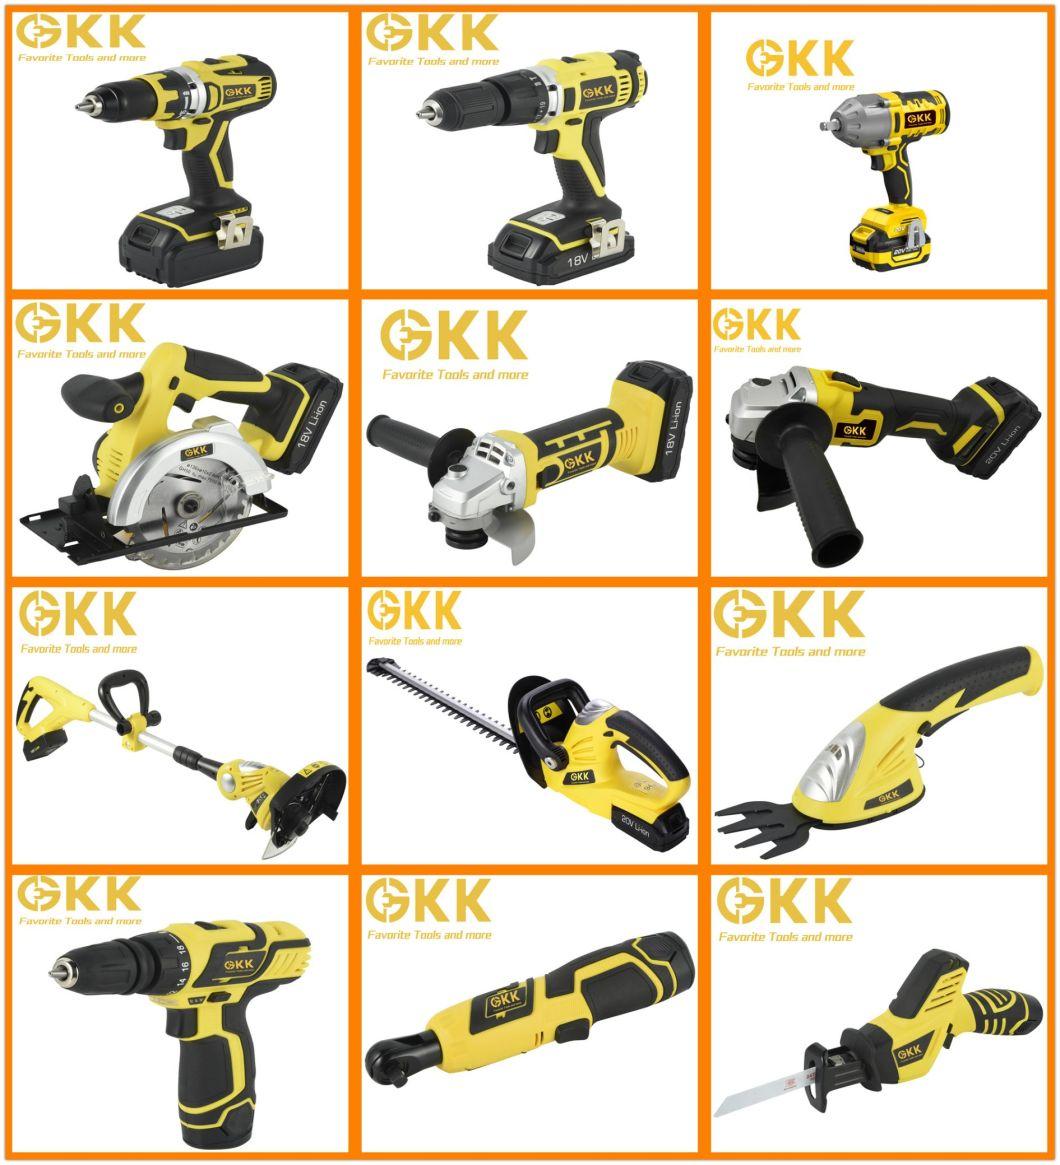 China Factory High-Quality 20V Lithium Brushless Angle Grinder Cordless Tool Power Tool (2.0/4.0/6.0ah)